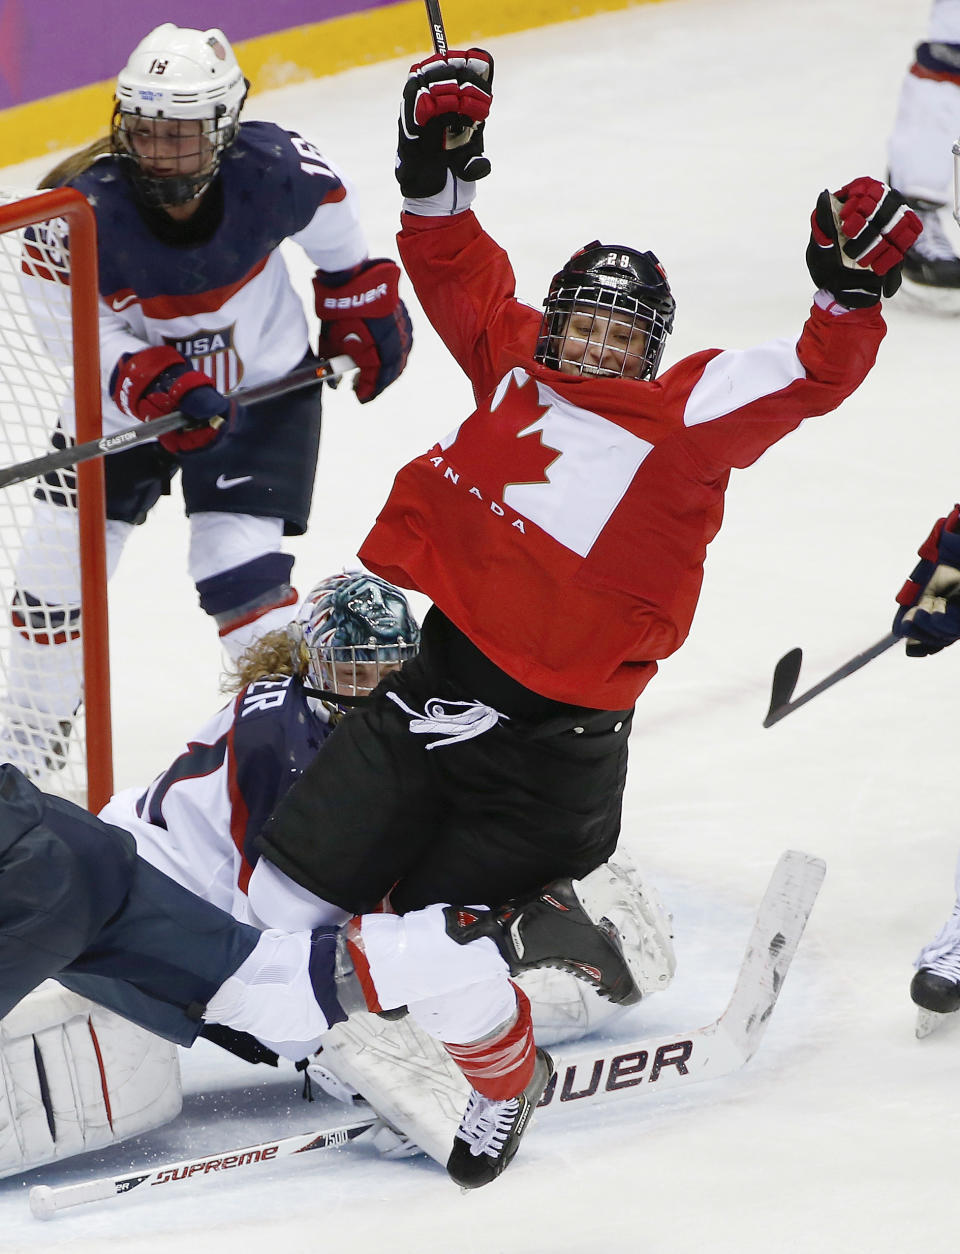 Marie-Philip Poulin of Canada, right, celebrates her goal against the United States in the third period of the women's gold medal ice hockey game at the 2014 Winter Olympics, Thursday, Feb. 20, 2014, in Sochi, Russia. (AP Photo/Petr David Josek, File)